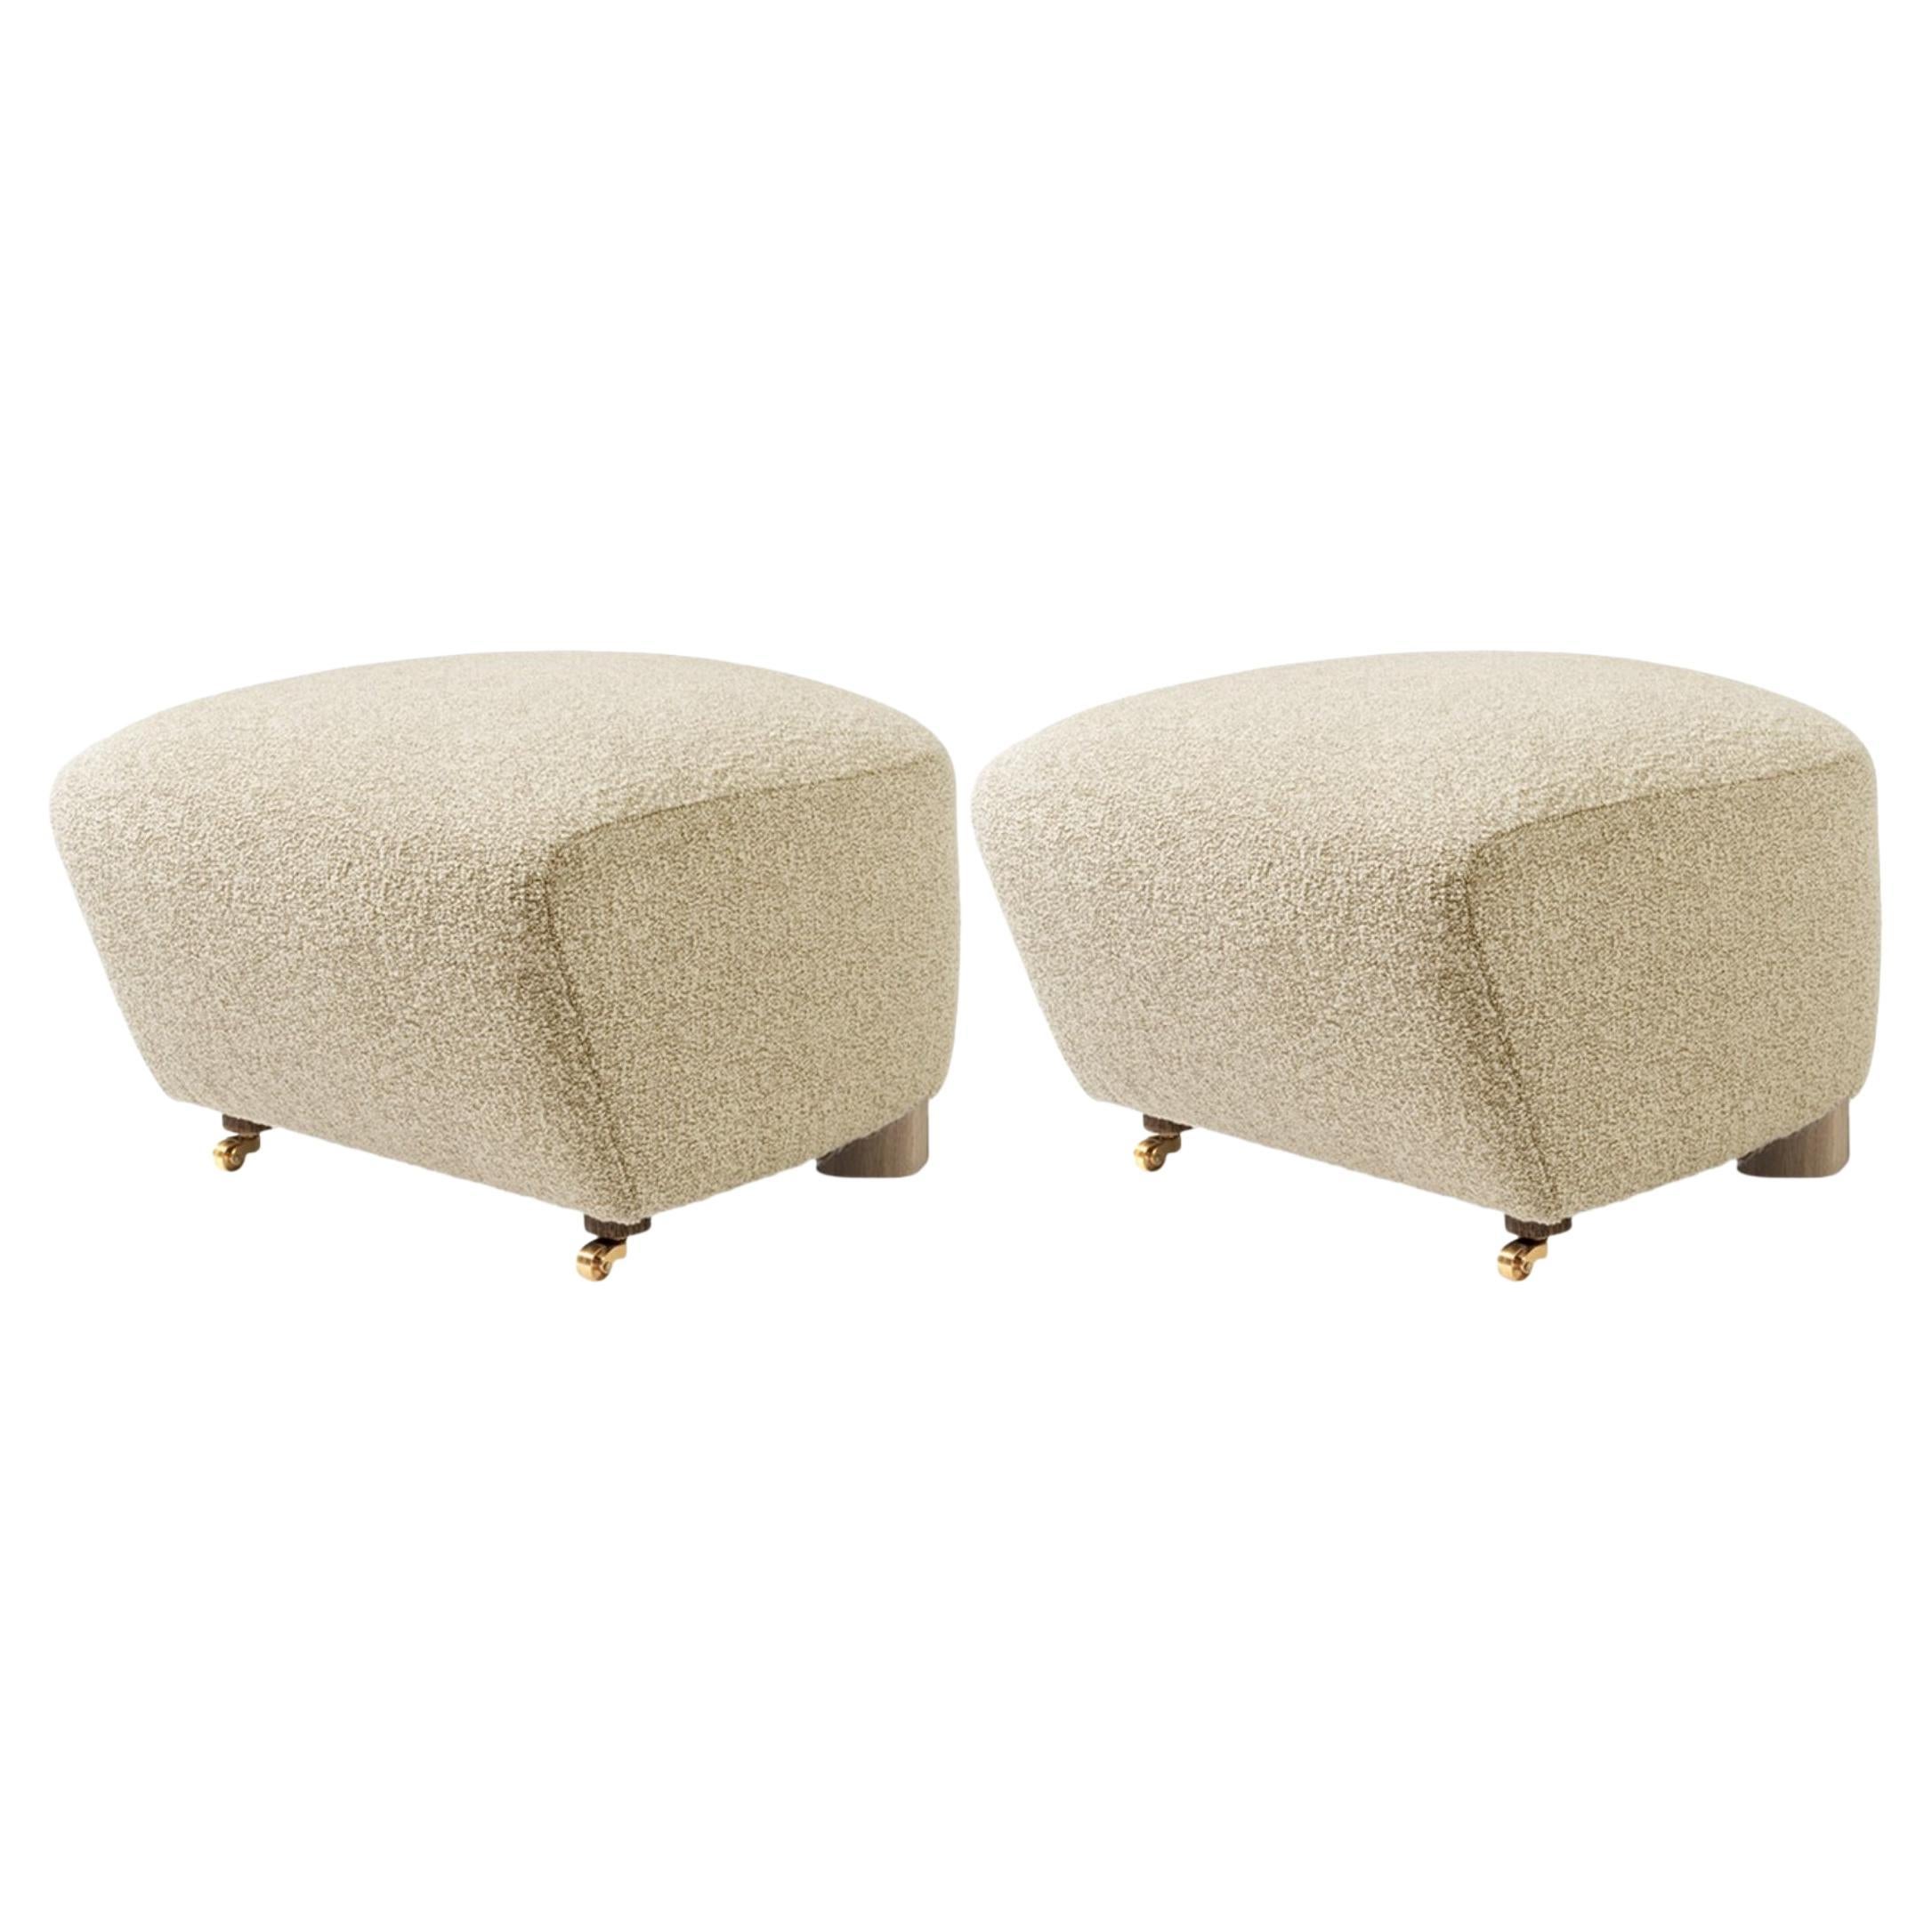 Set of 2 Beige Natural Oak Sahco Zero the Tired Man Footstool by Lassen For Sale